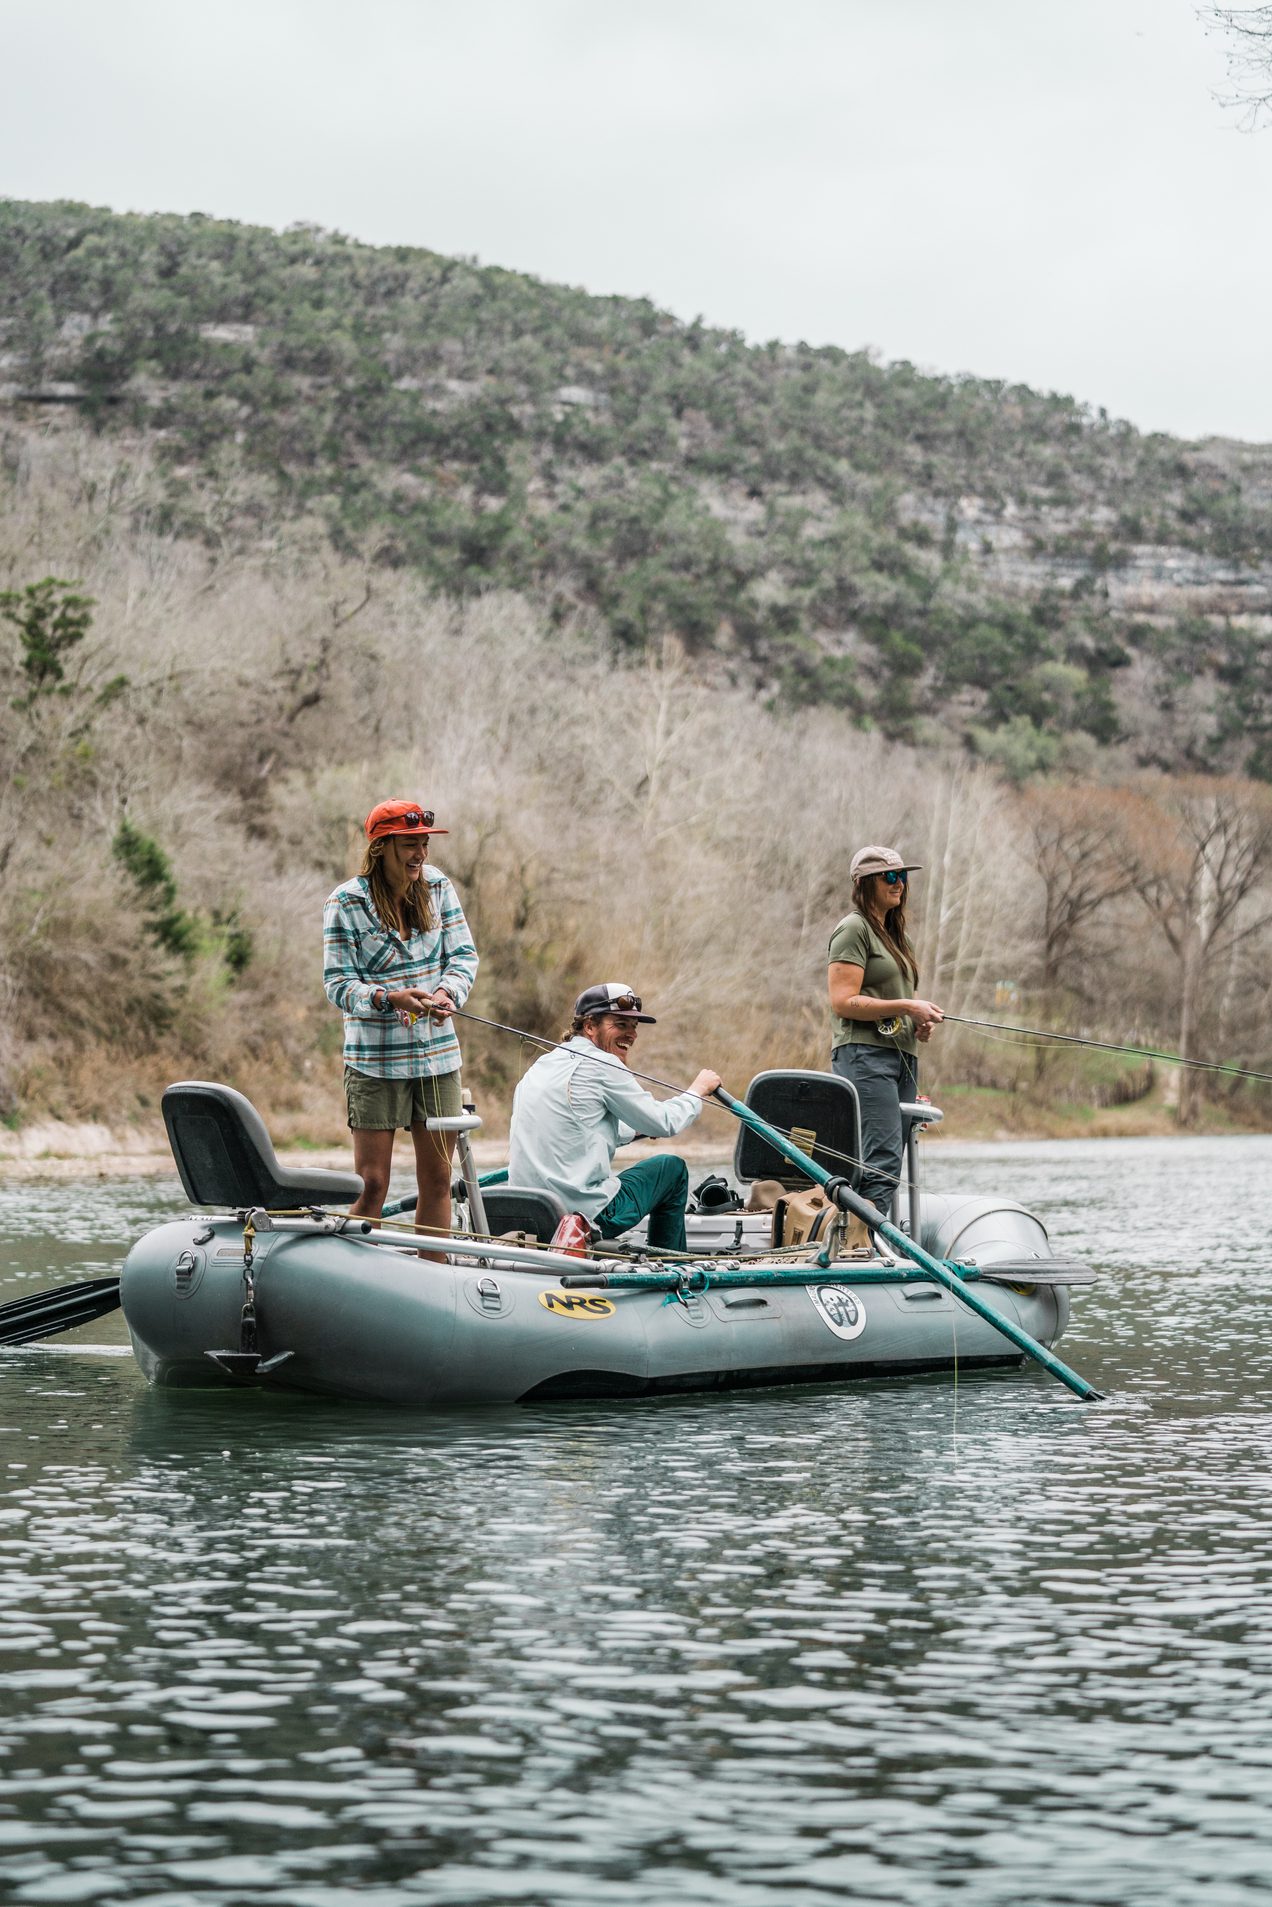 Duck Camp launches new women's outdoor apparel collection